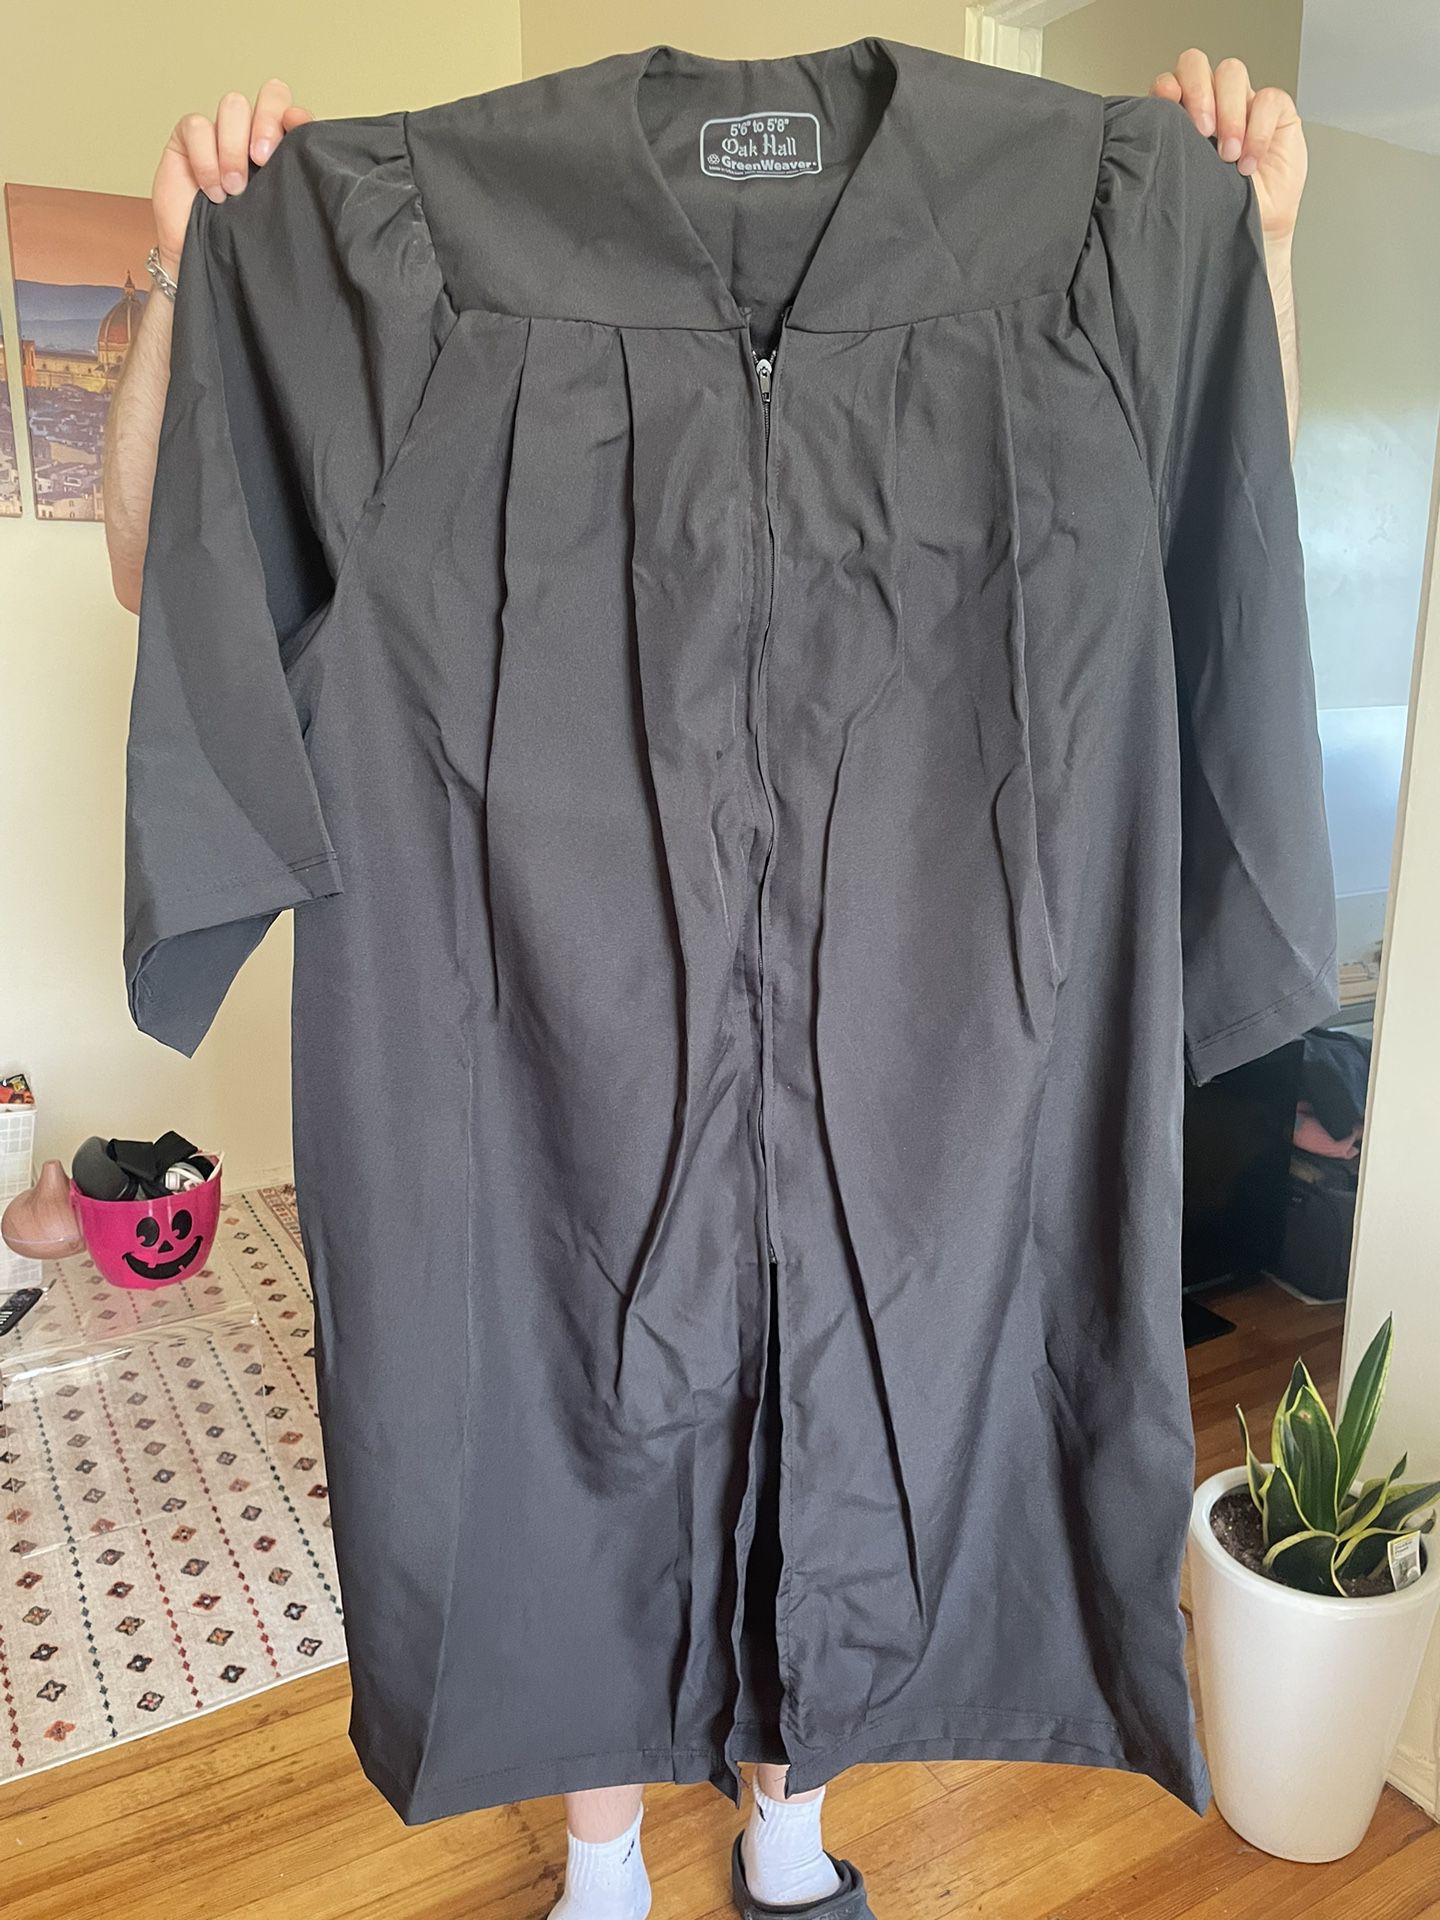 Graduation Cap and gown 